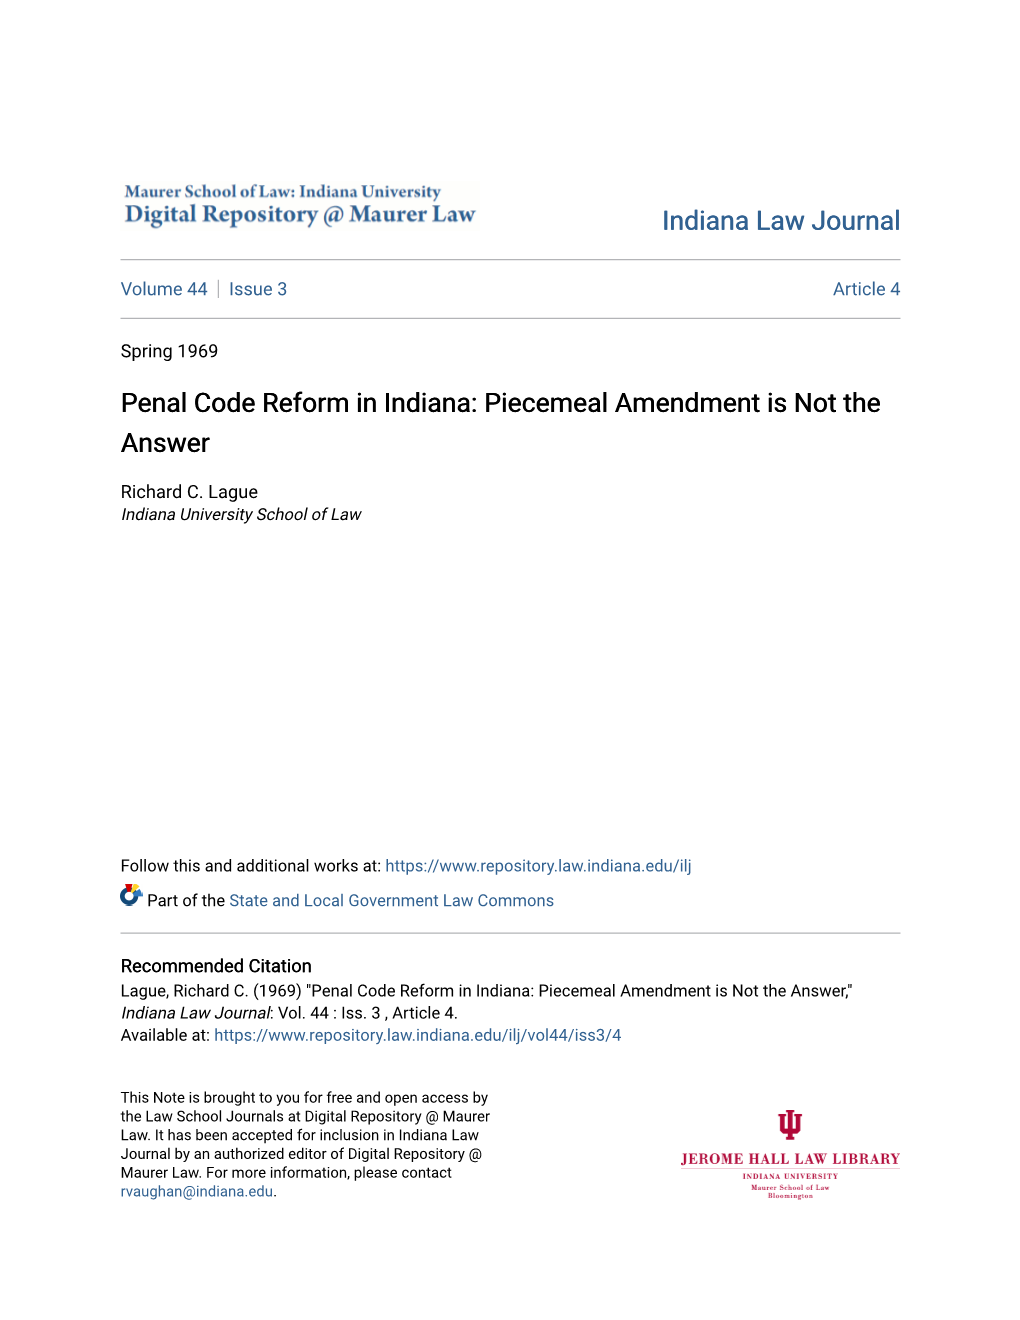 Penal Code Reform in Indiana: Piecemeal Amendment Is Not the Answer